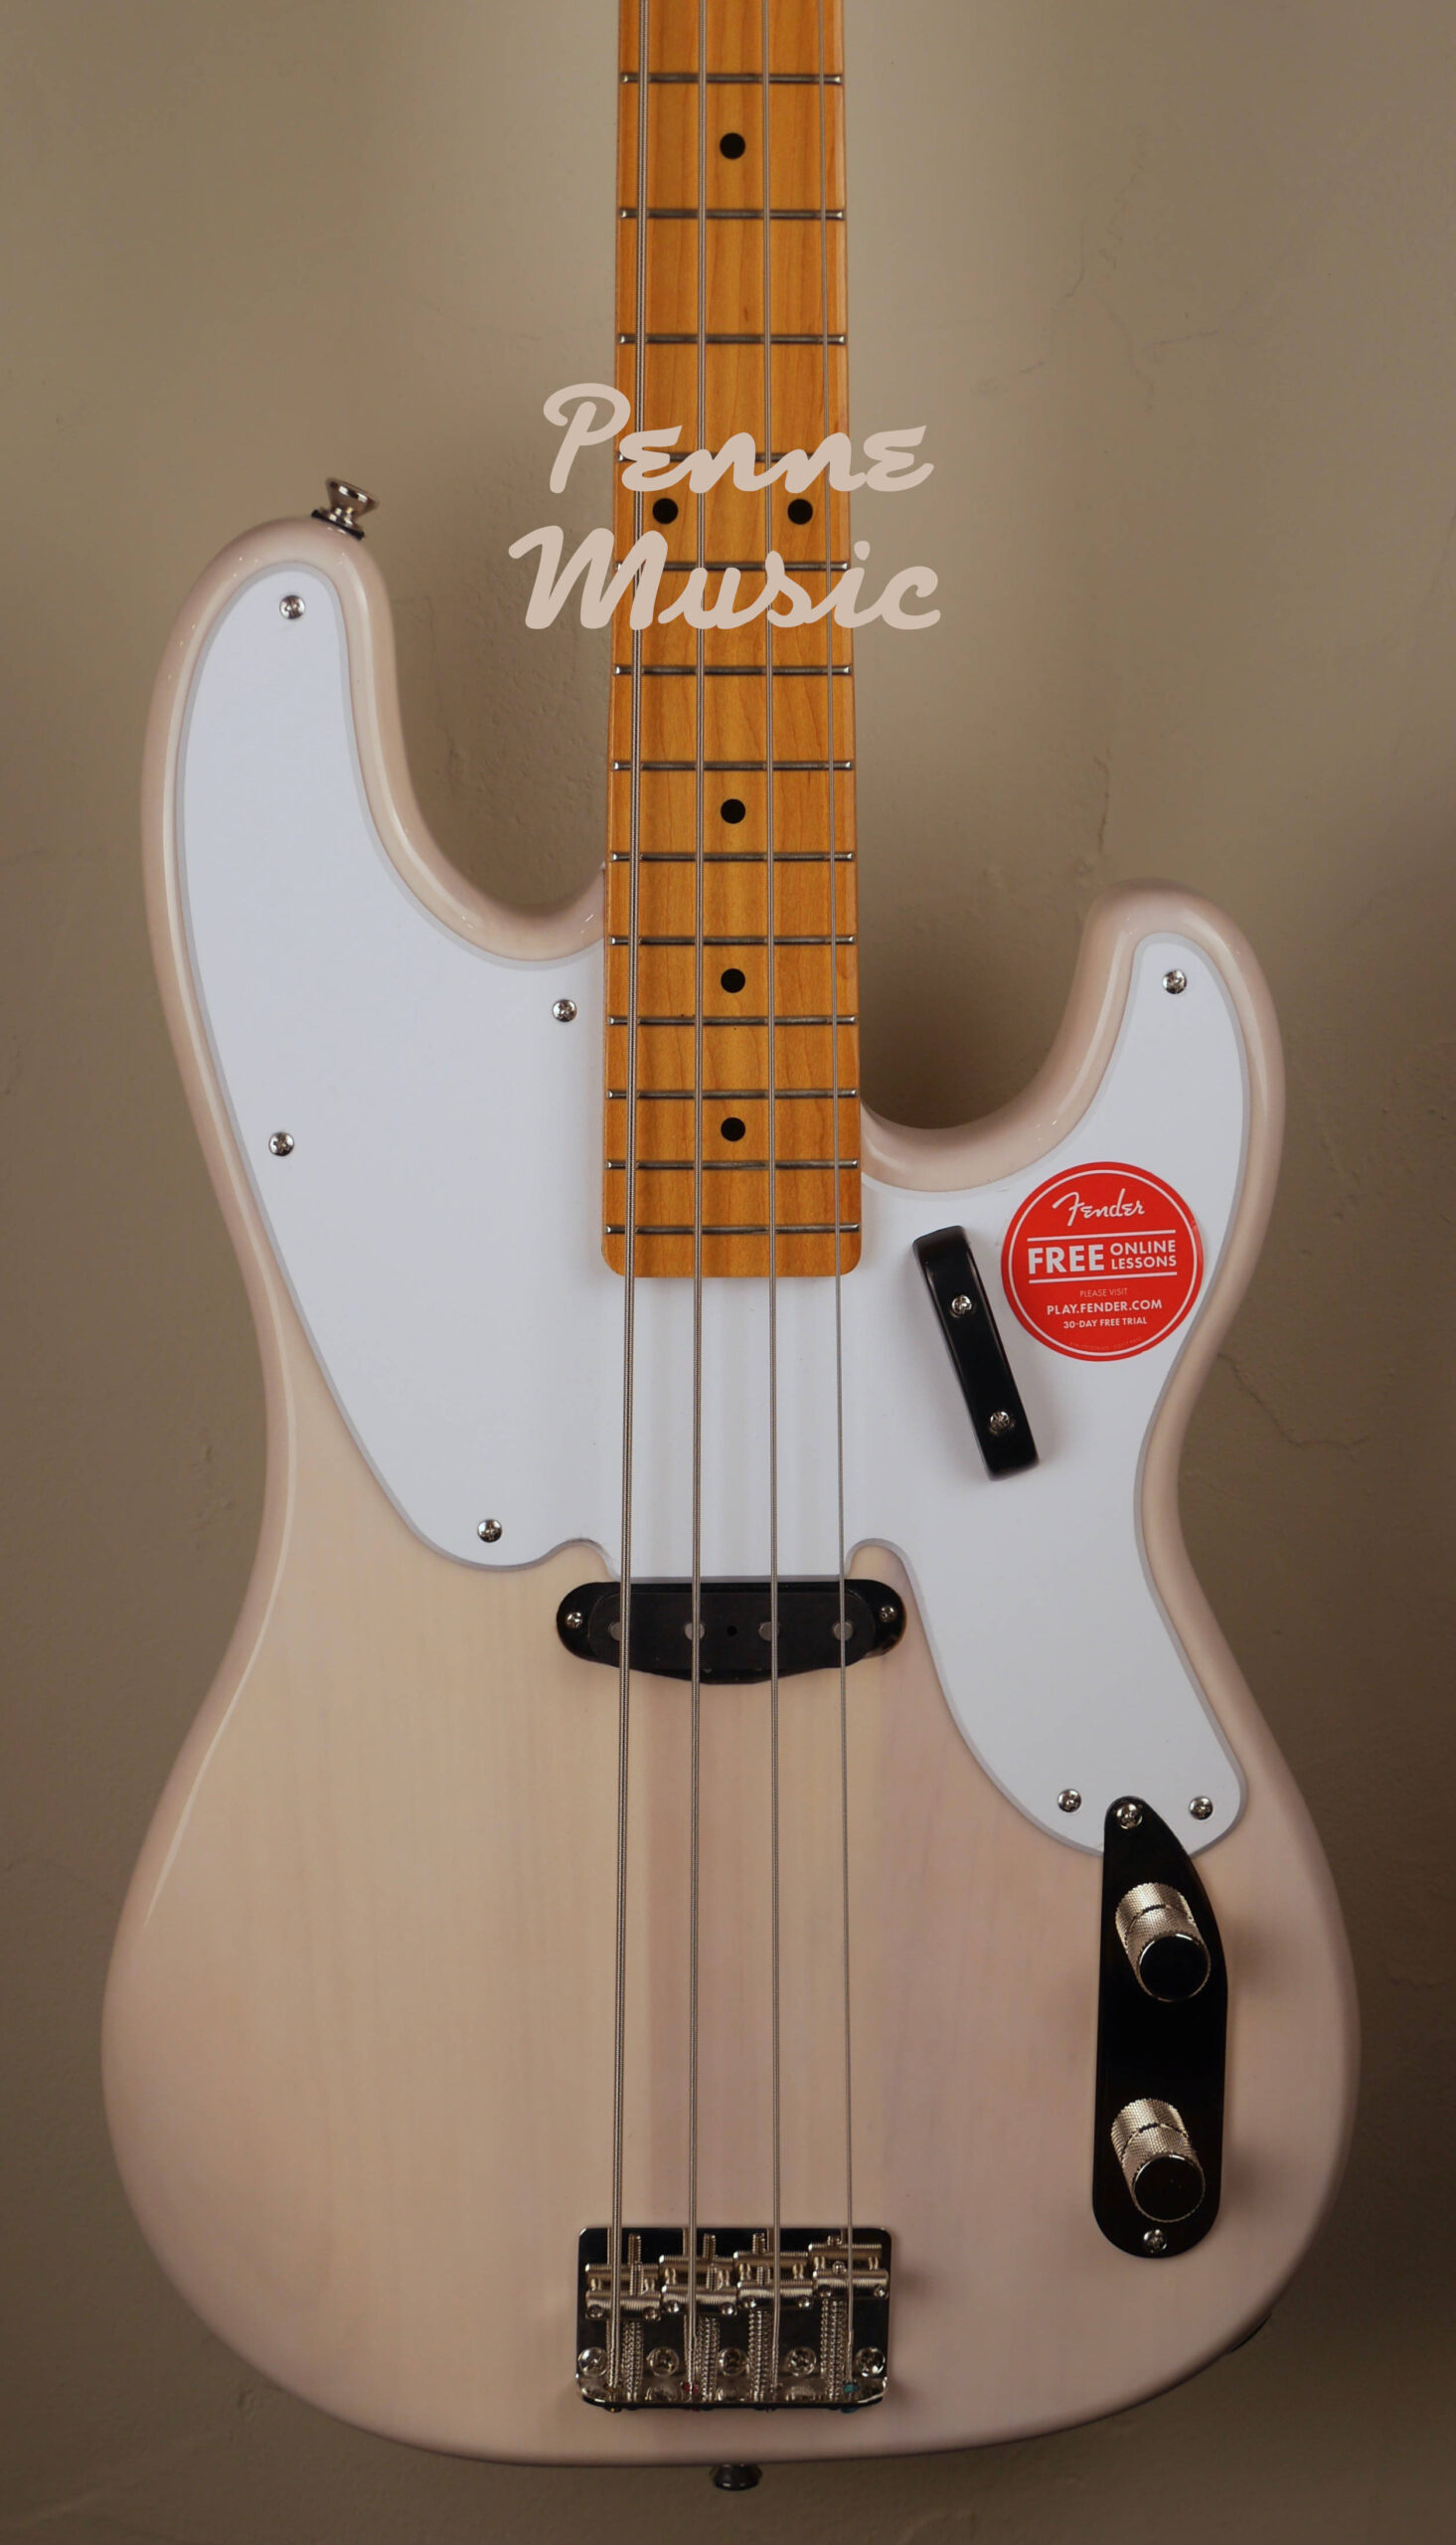 Squier by Fender Classic Vibe 50 Precision Bass White Blonde 3